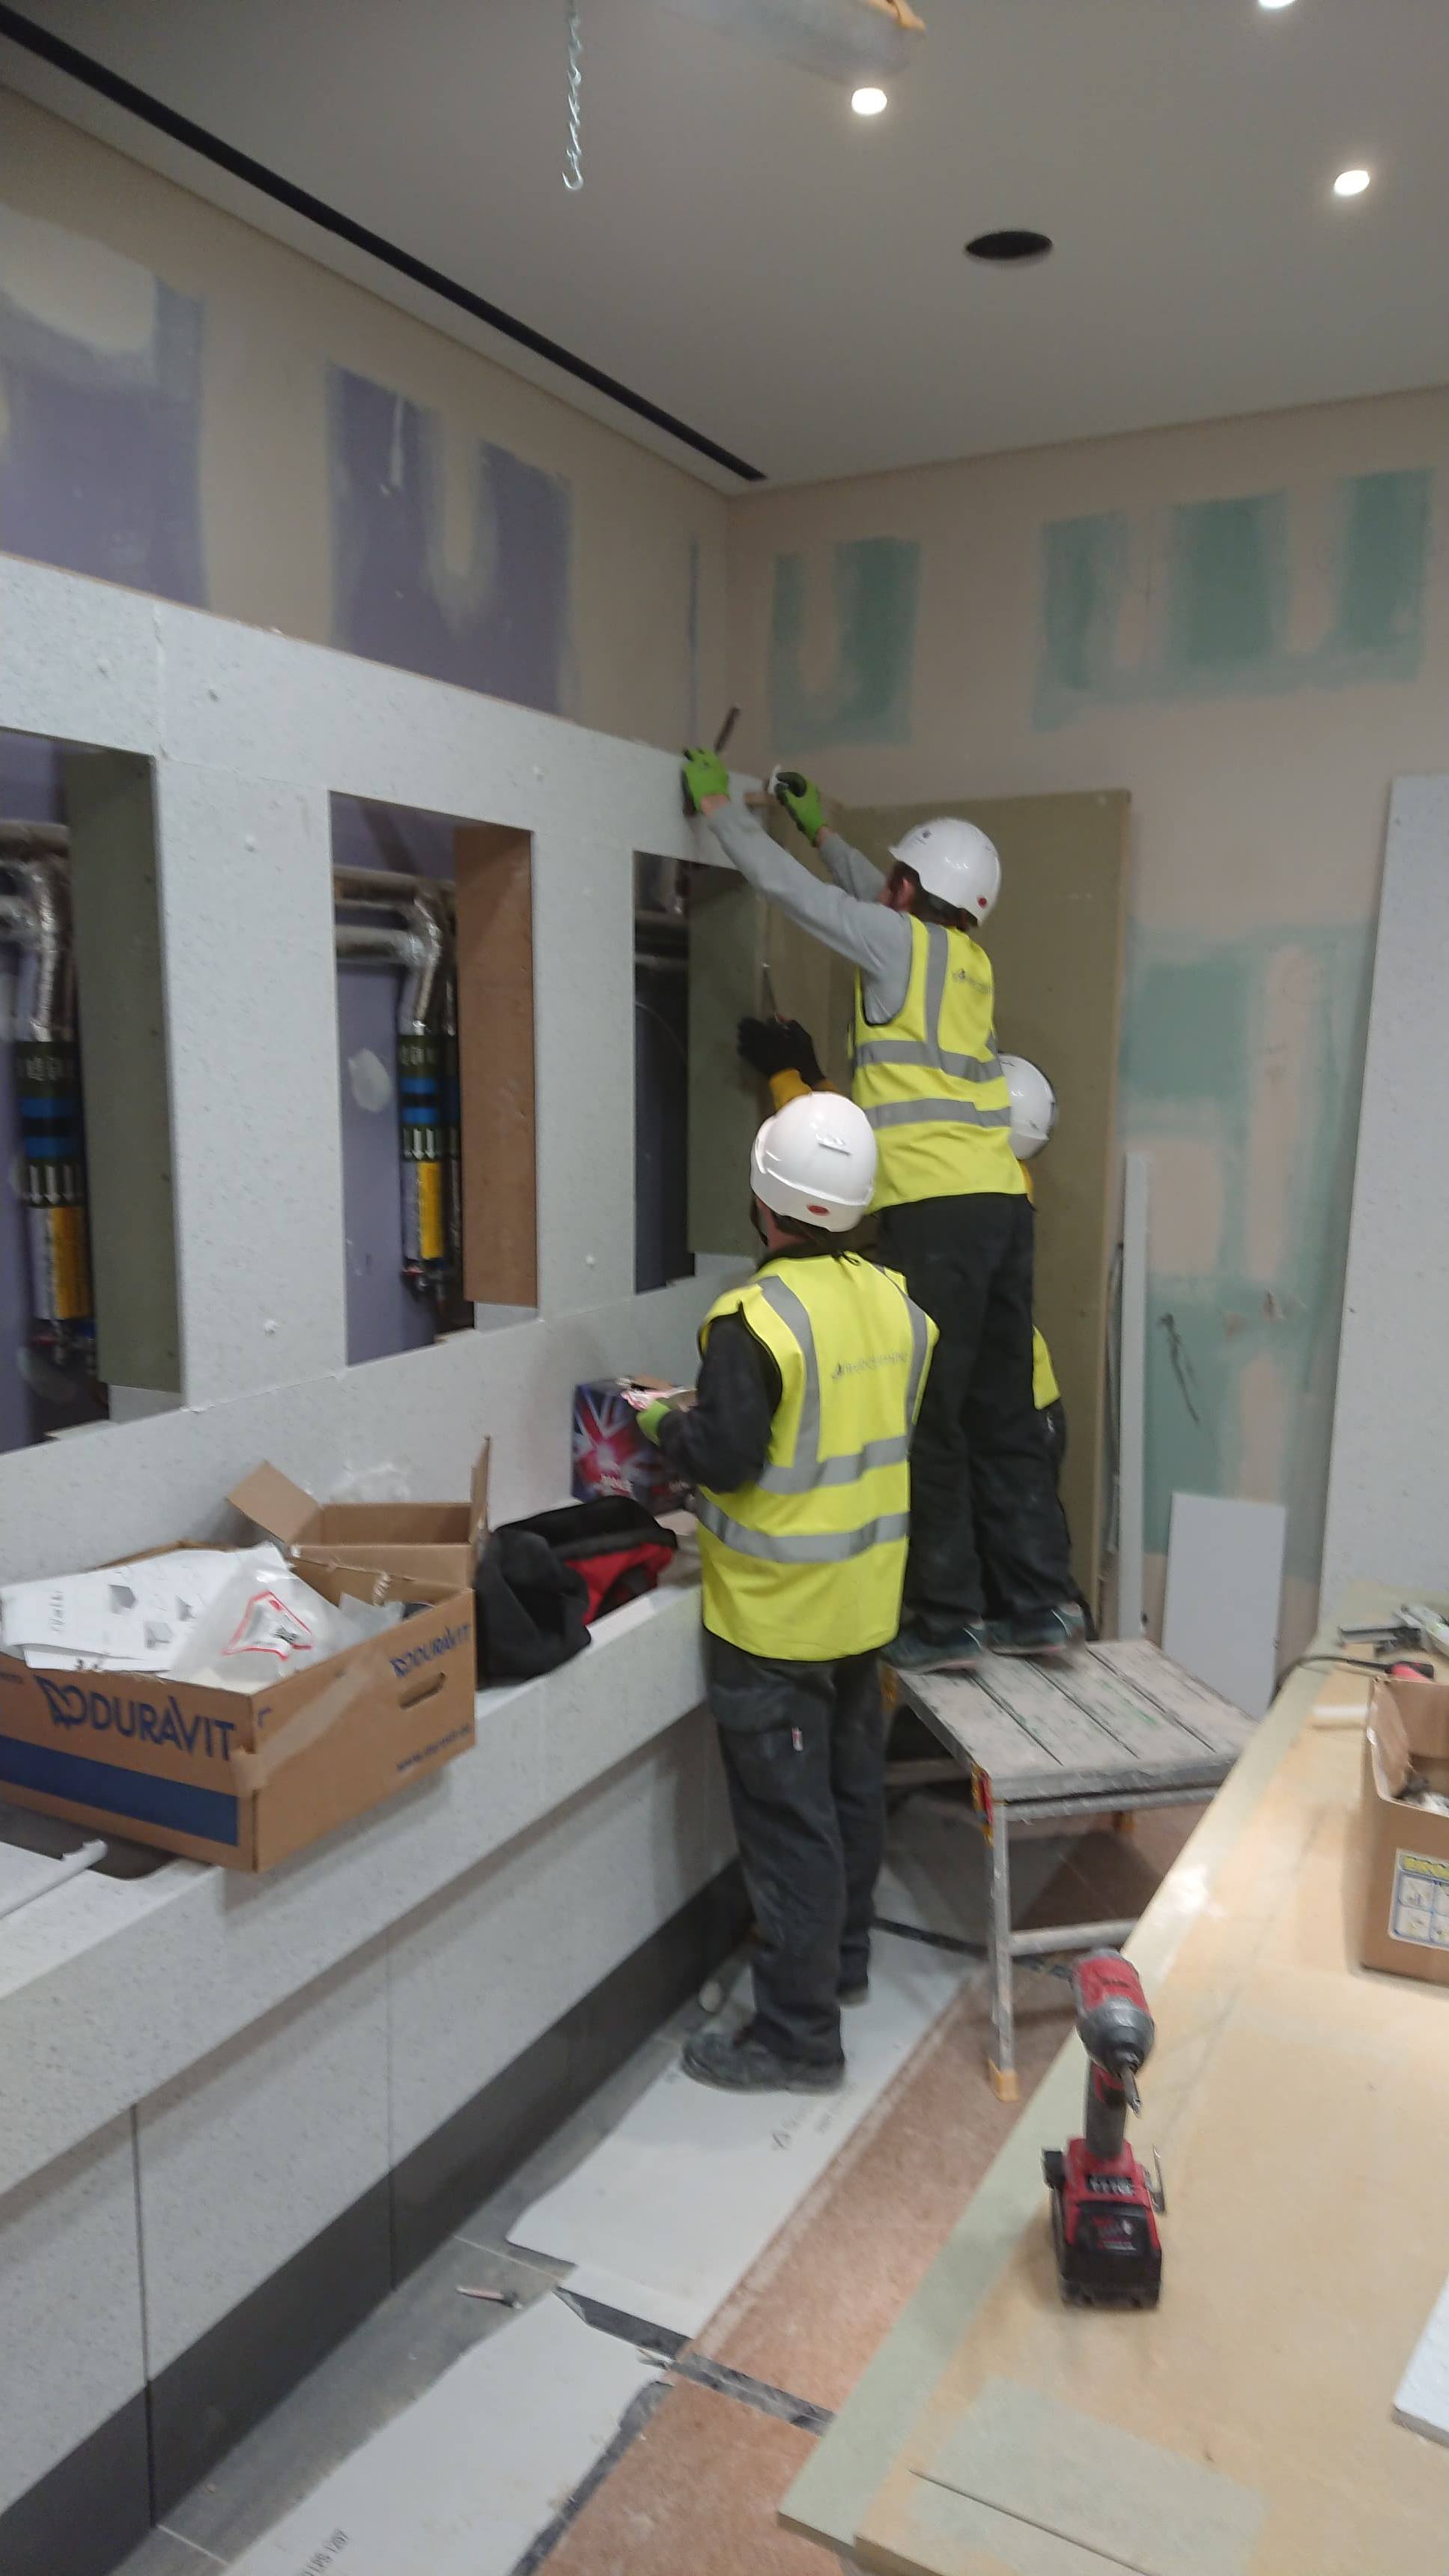 Plumtree Court, Shoe Lane, Central London, EC4 - Skilled Corian fitters 8